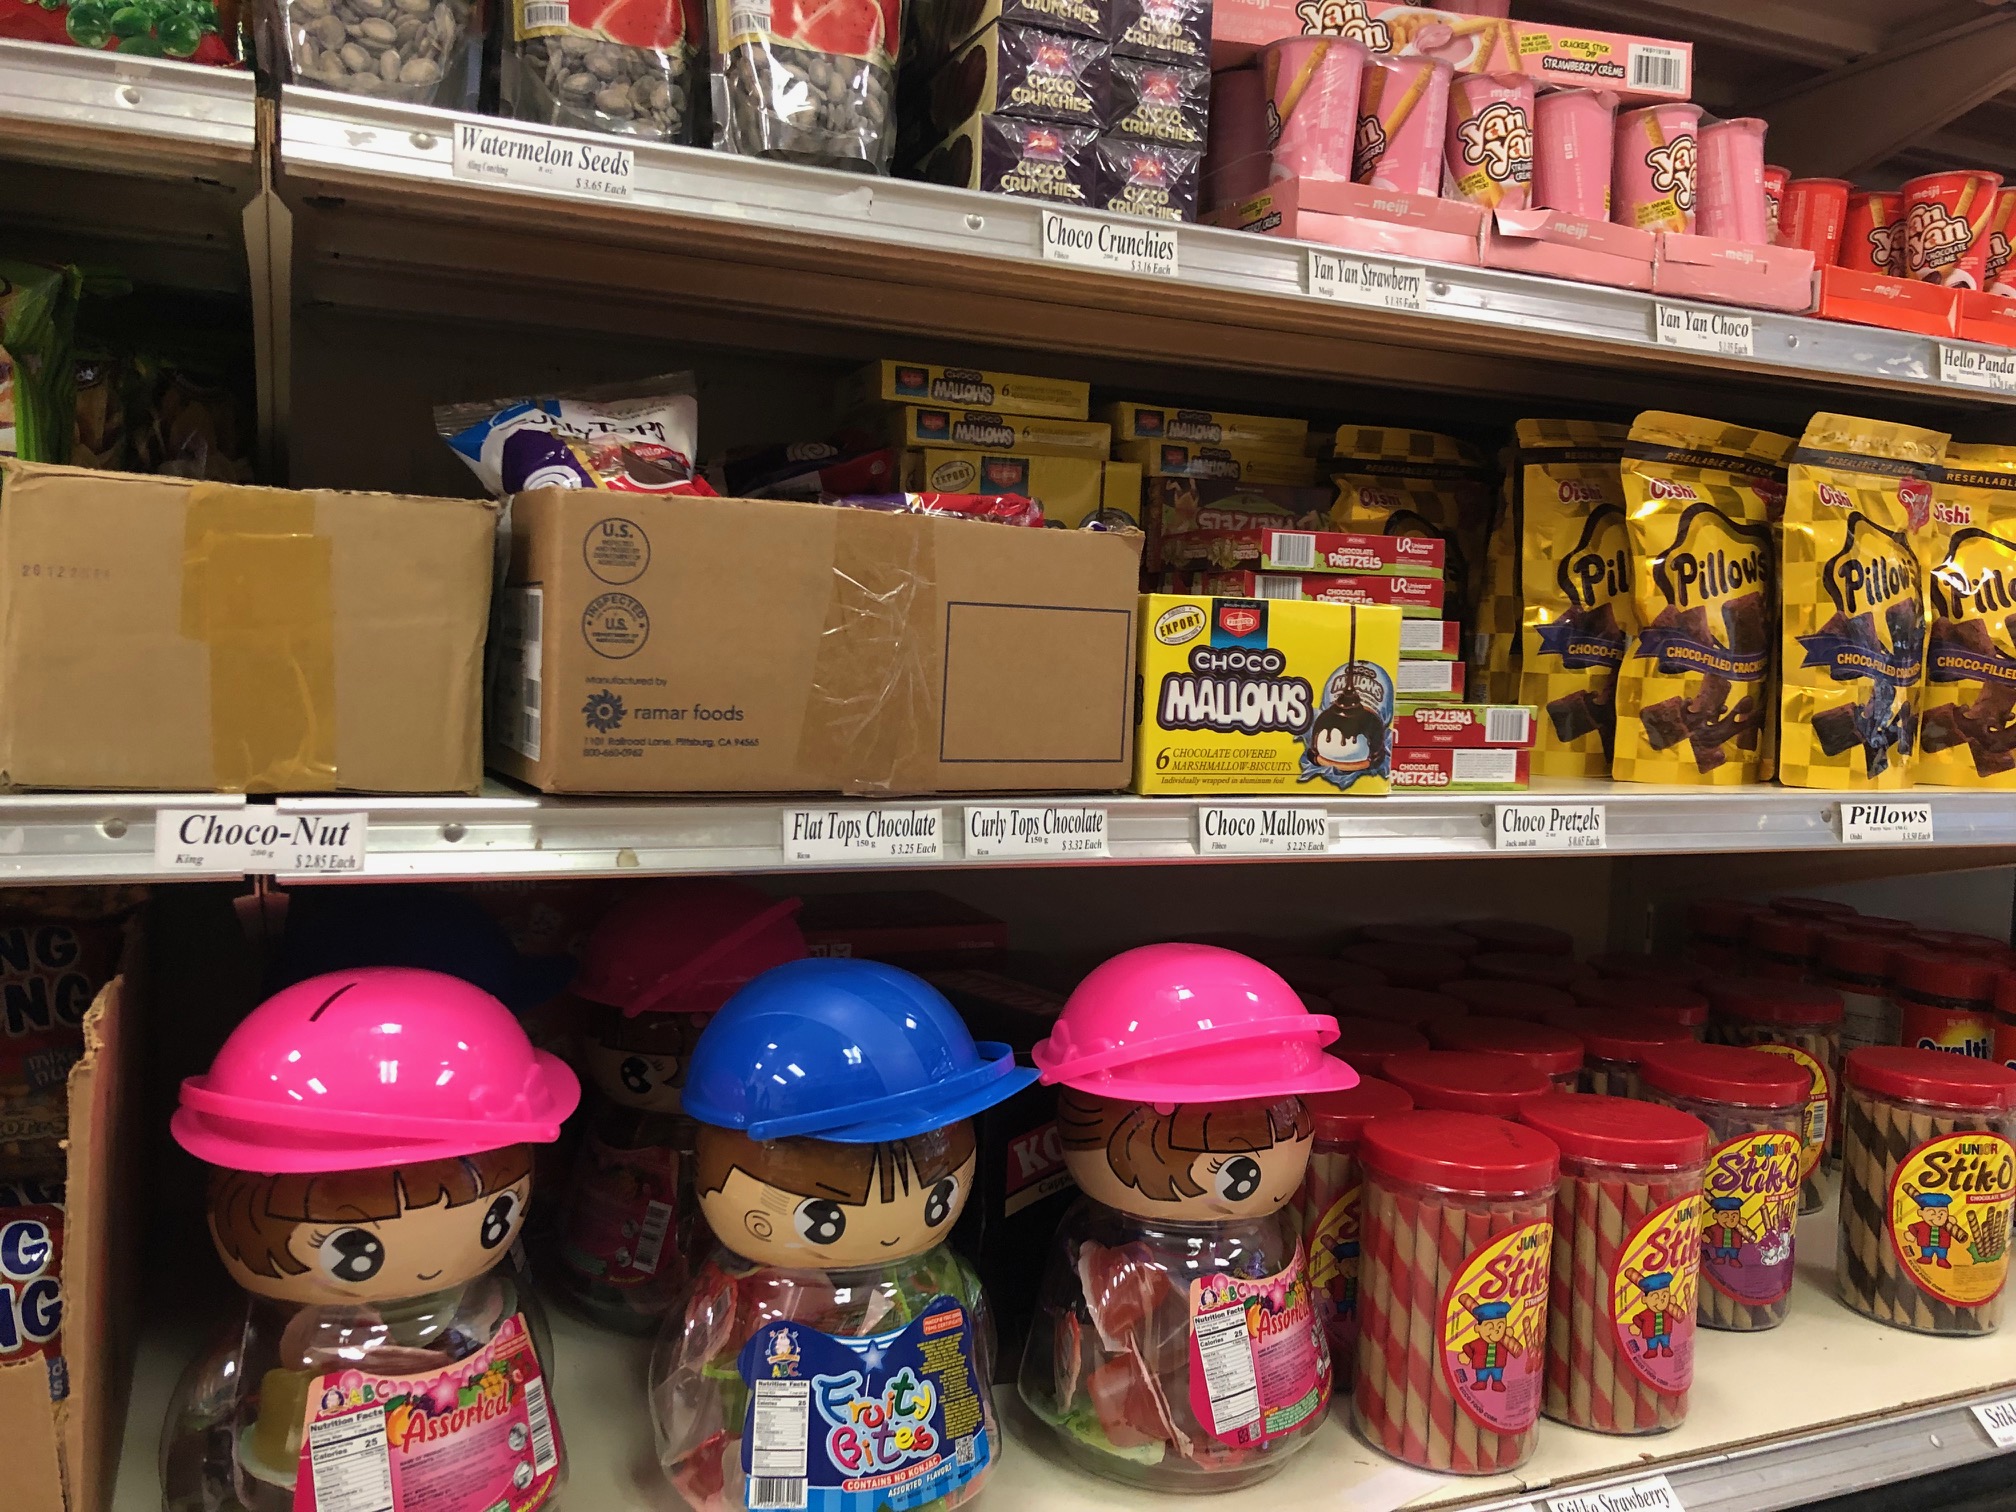 On the shelves, there are several chocolate sweet options. On the bottom shelf, there are three child-like containers with hard hats, and inside the transparent body, there are fruity candies. Photo by Alyssa Buckley.